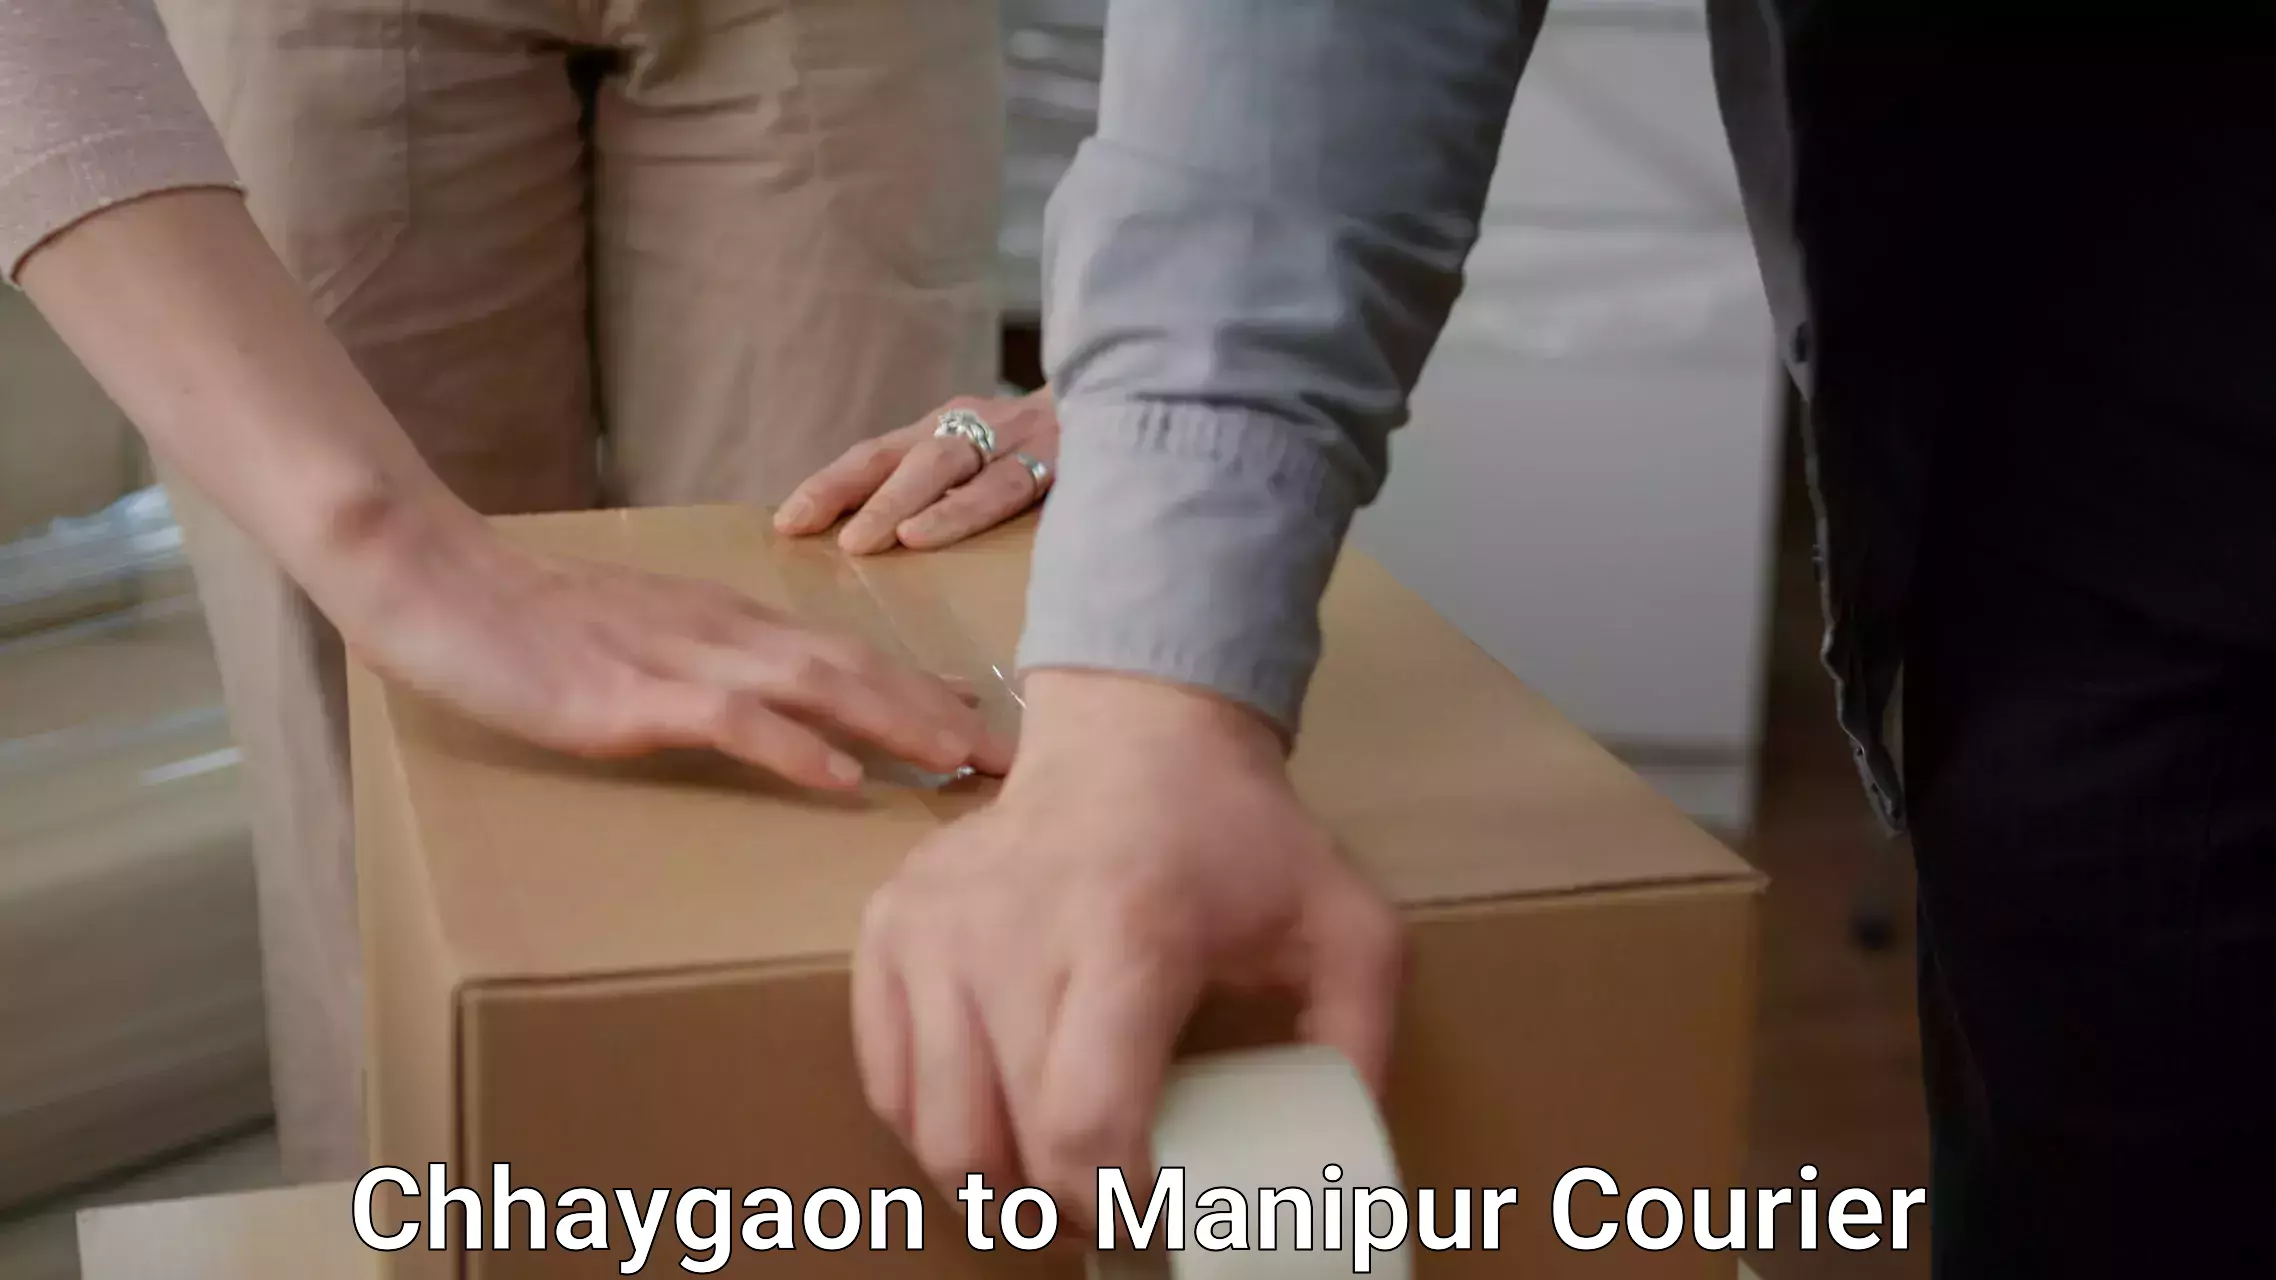 Furniture delivery service Chhaygaon to Manipur